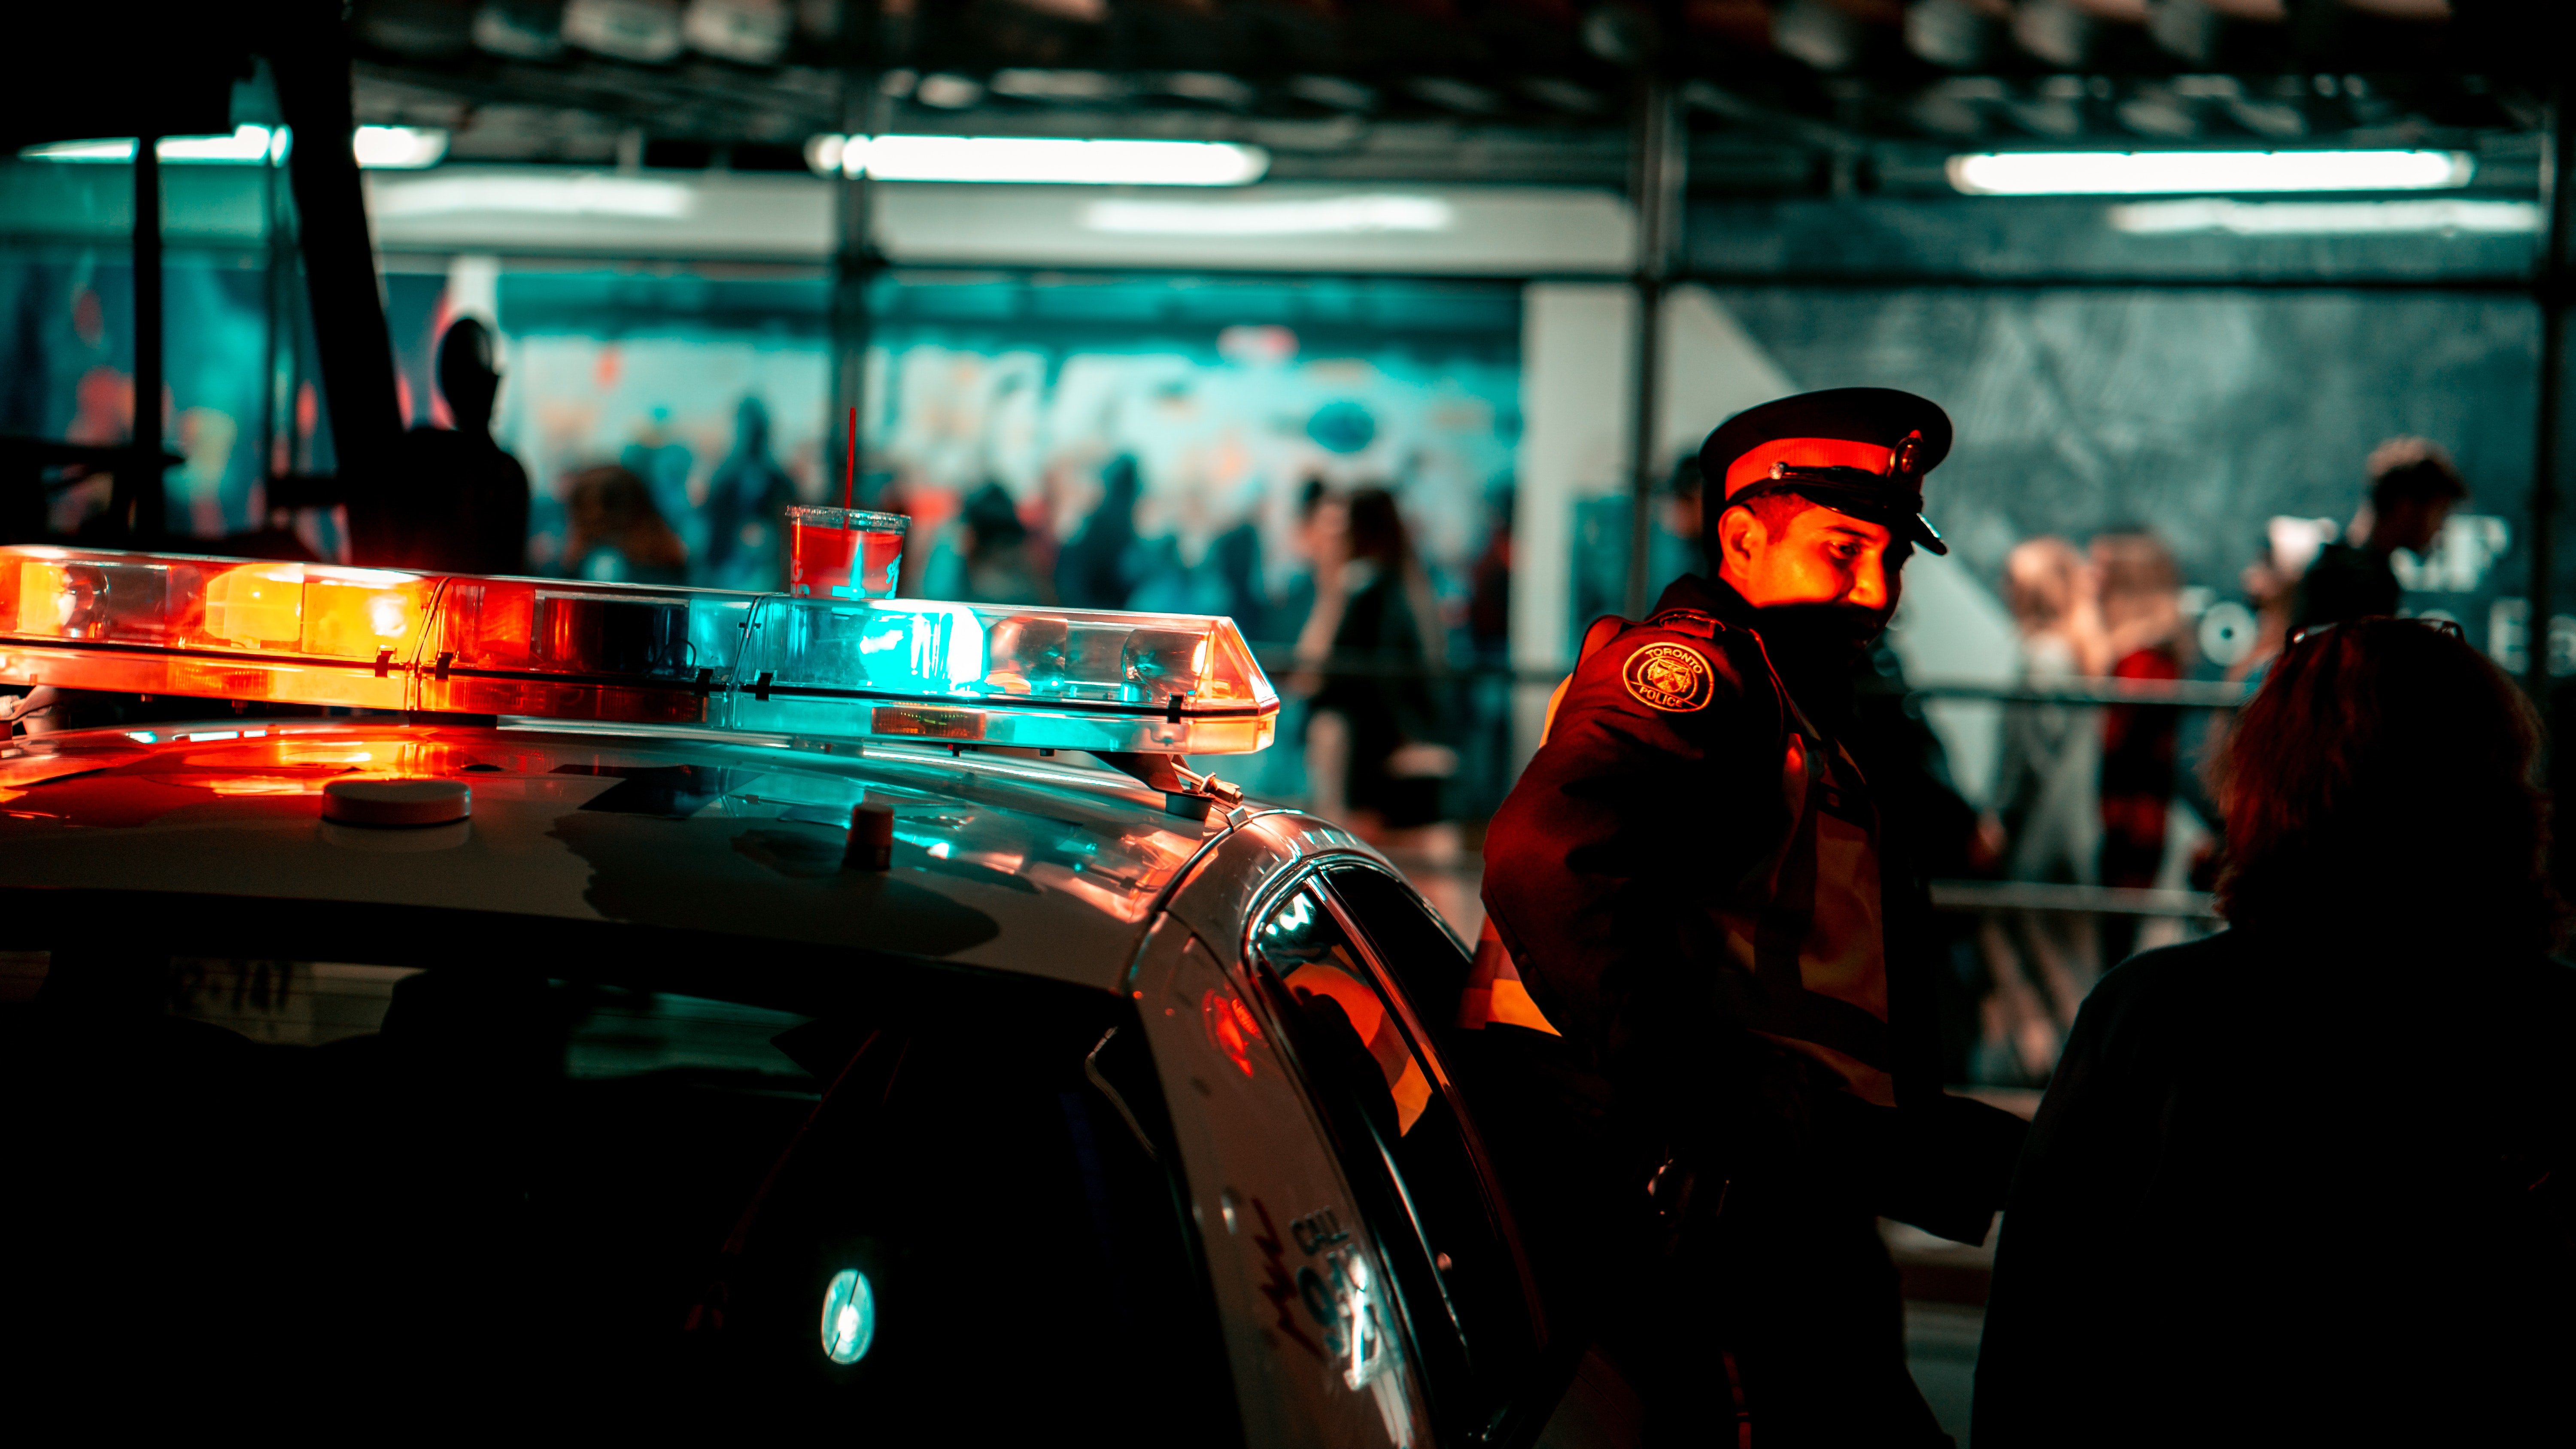 Police officer next to a vehicle. | Source: Pexels/ Sunyu Kim